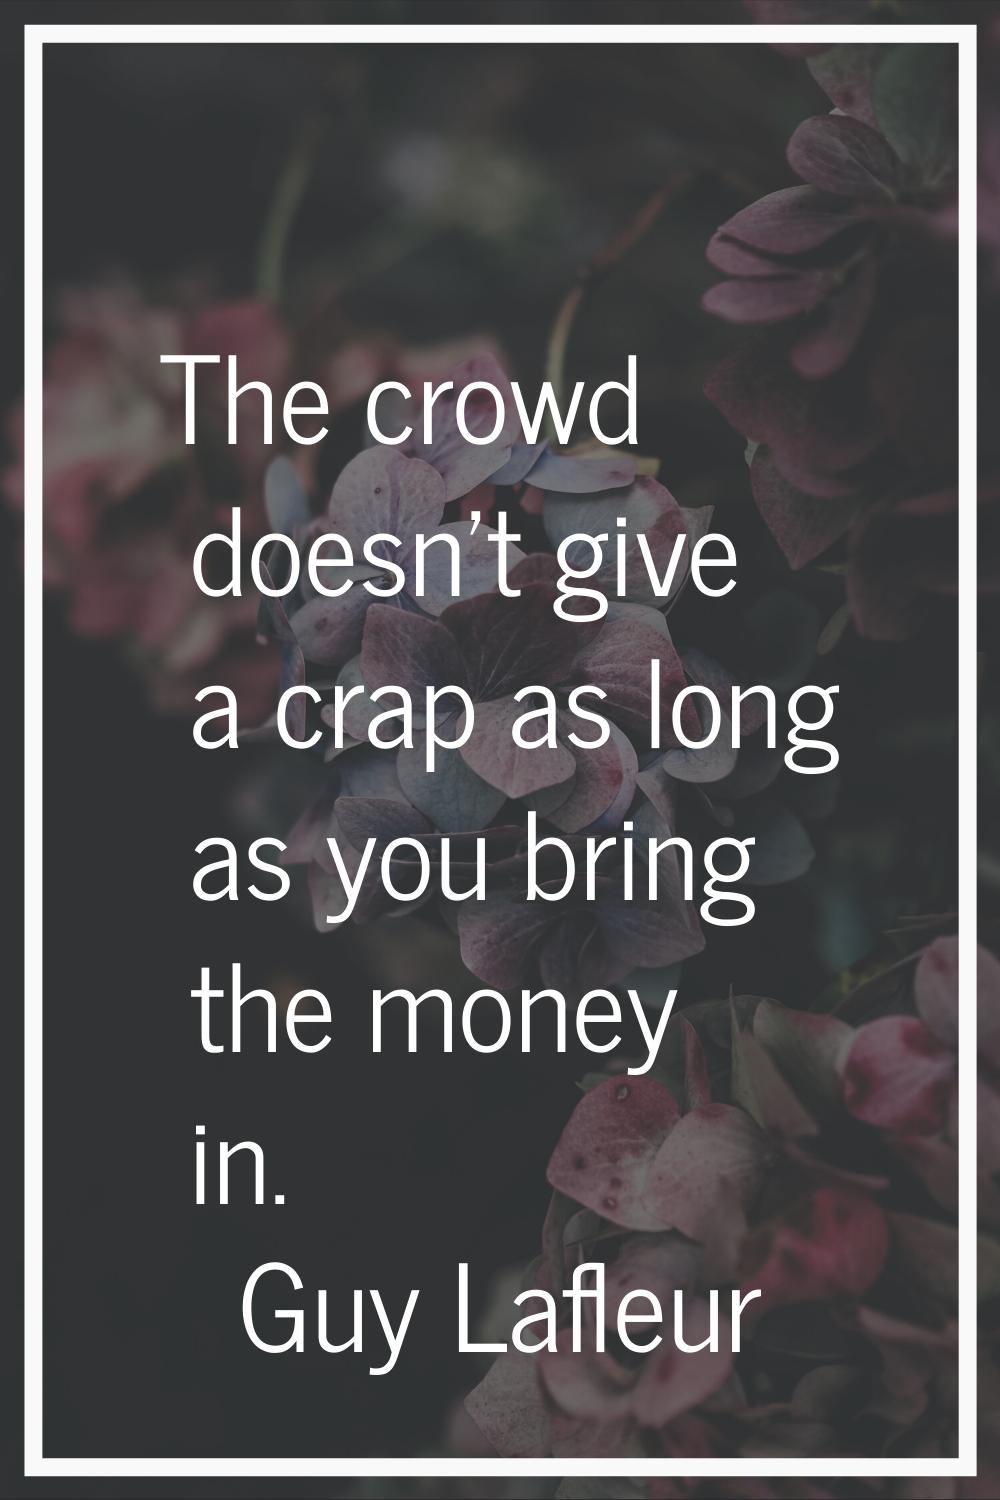 The crowd doesn't give a crap as long as you bring the money in.